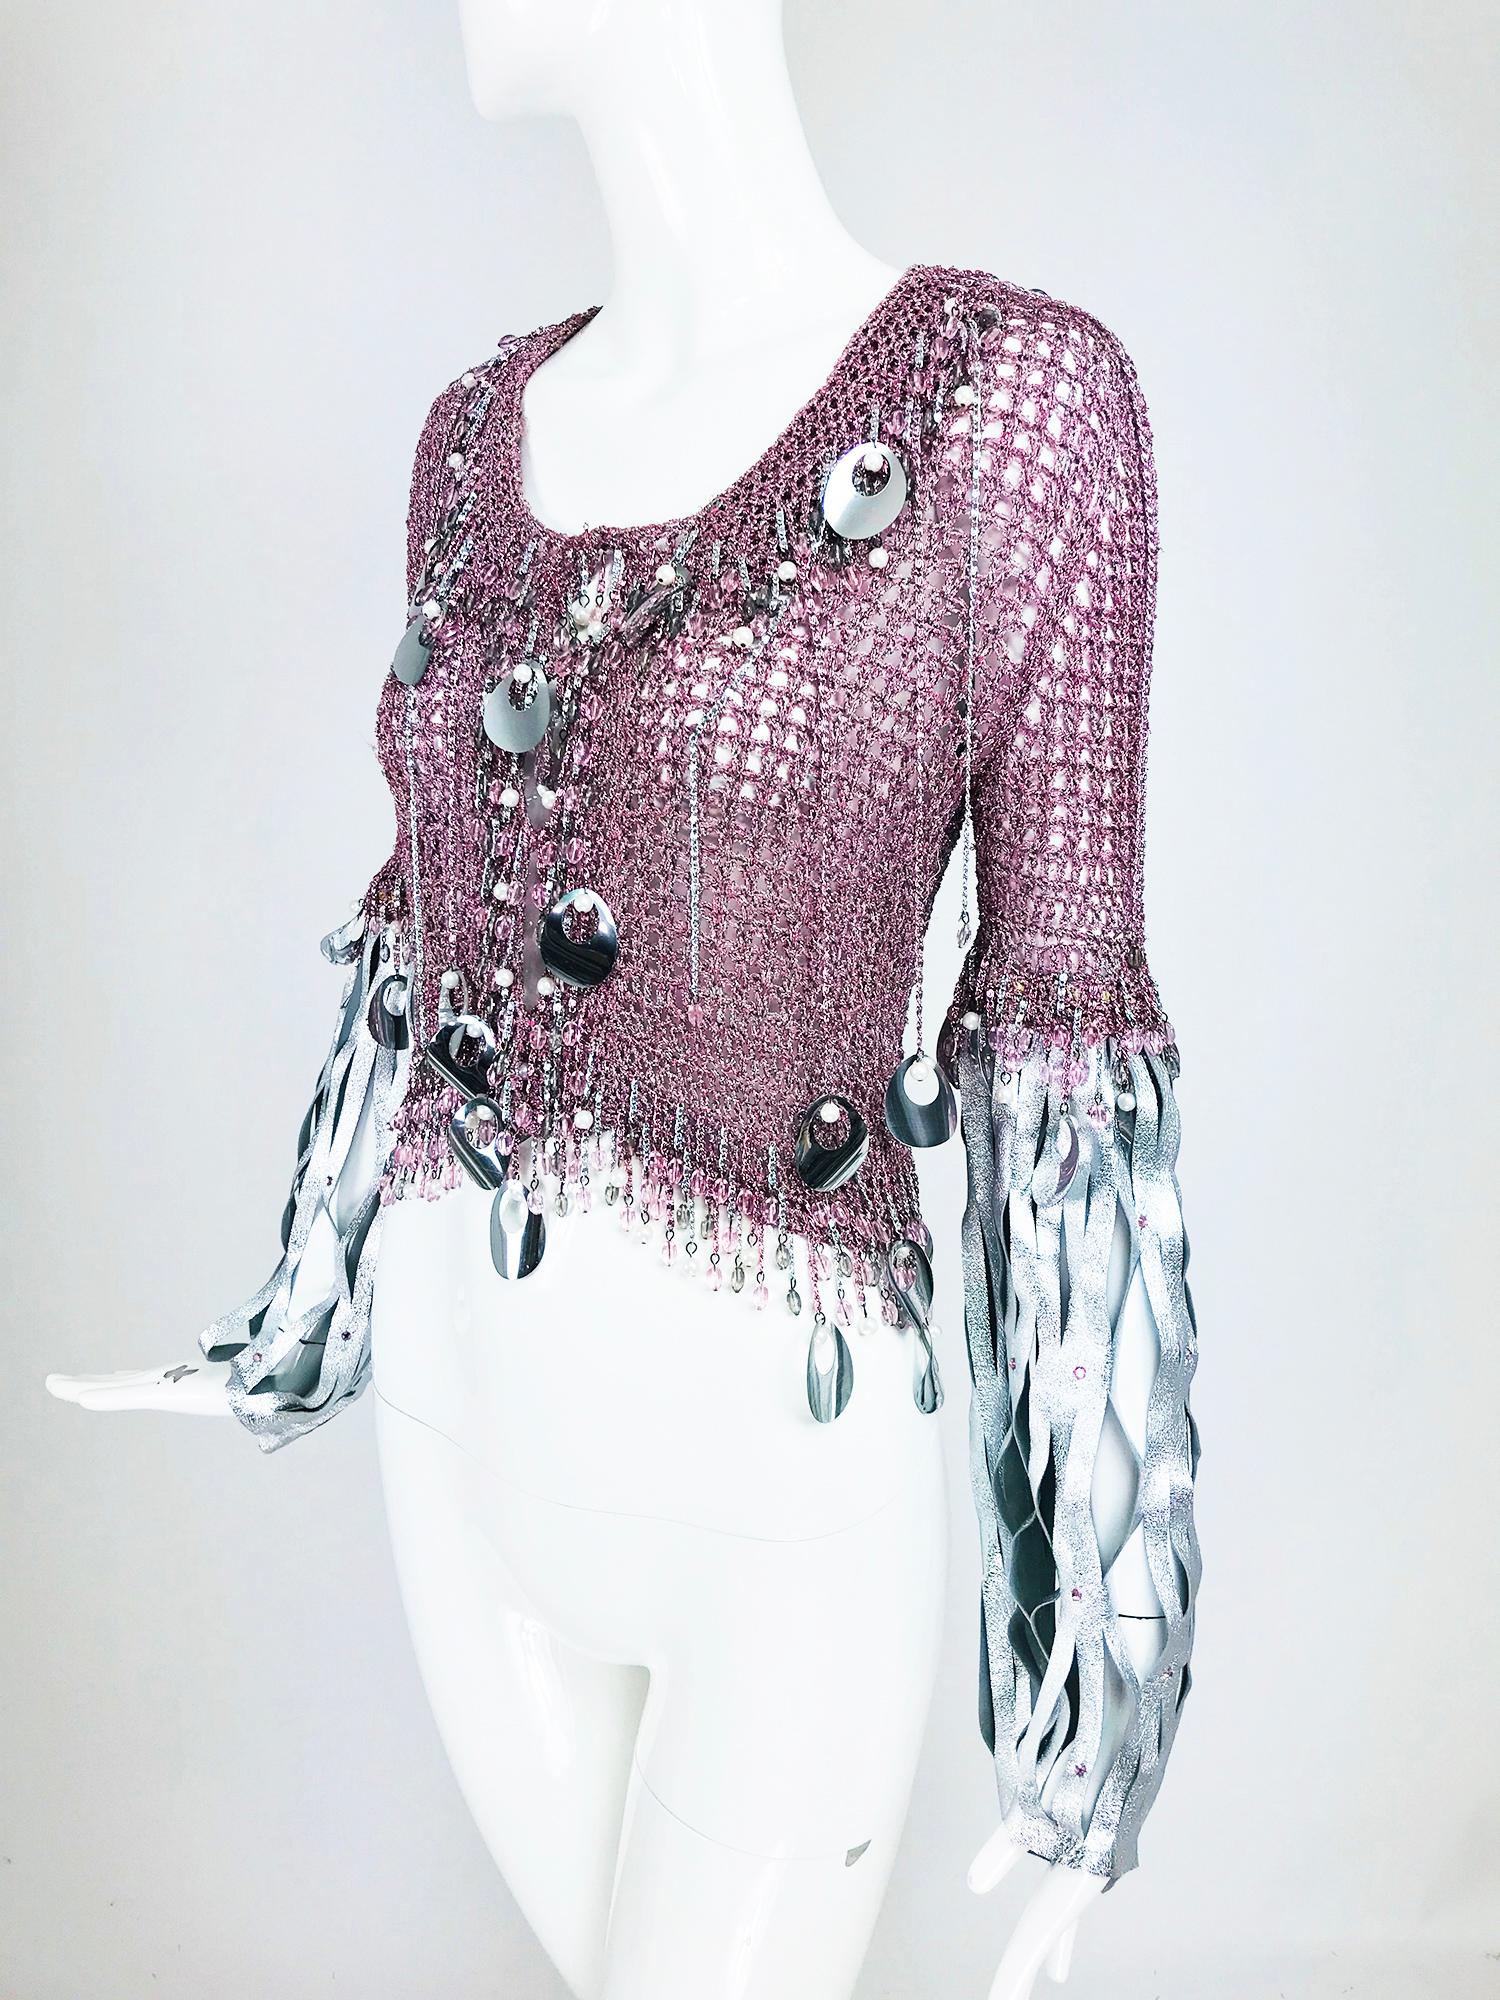 Vintage Loris Azzaro metallic pink and silver leather sweater from the 1980s. Pinks and silver metallic thread are crocheted together to create this sparkly sweater. In addition, the sweater has metal chains at the neck front and back of various